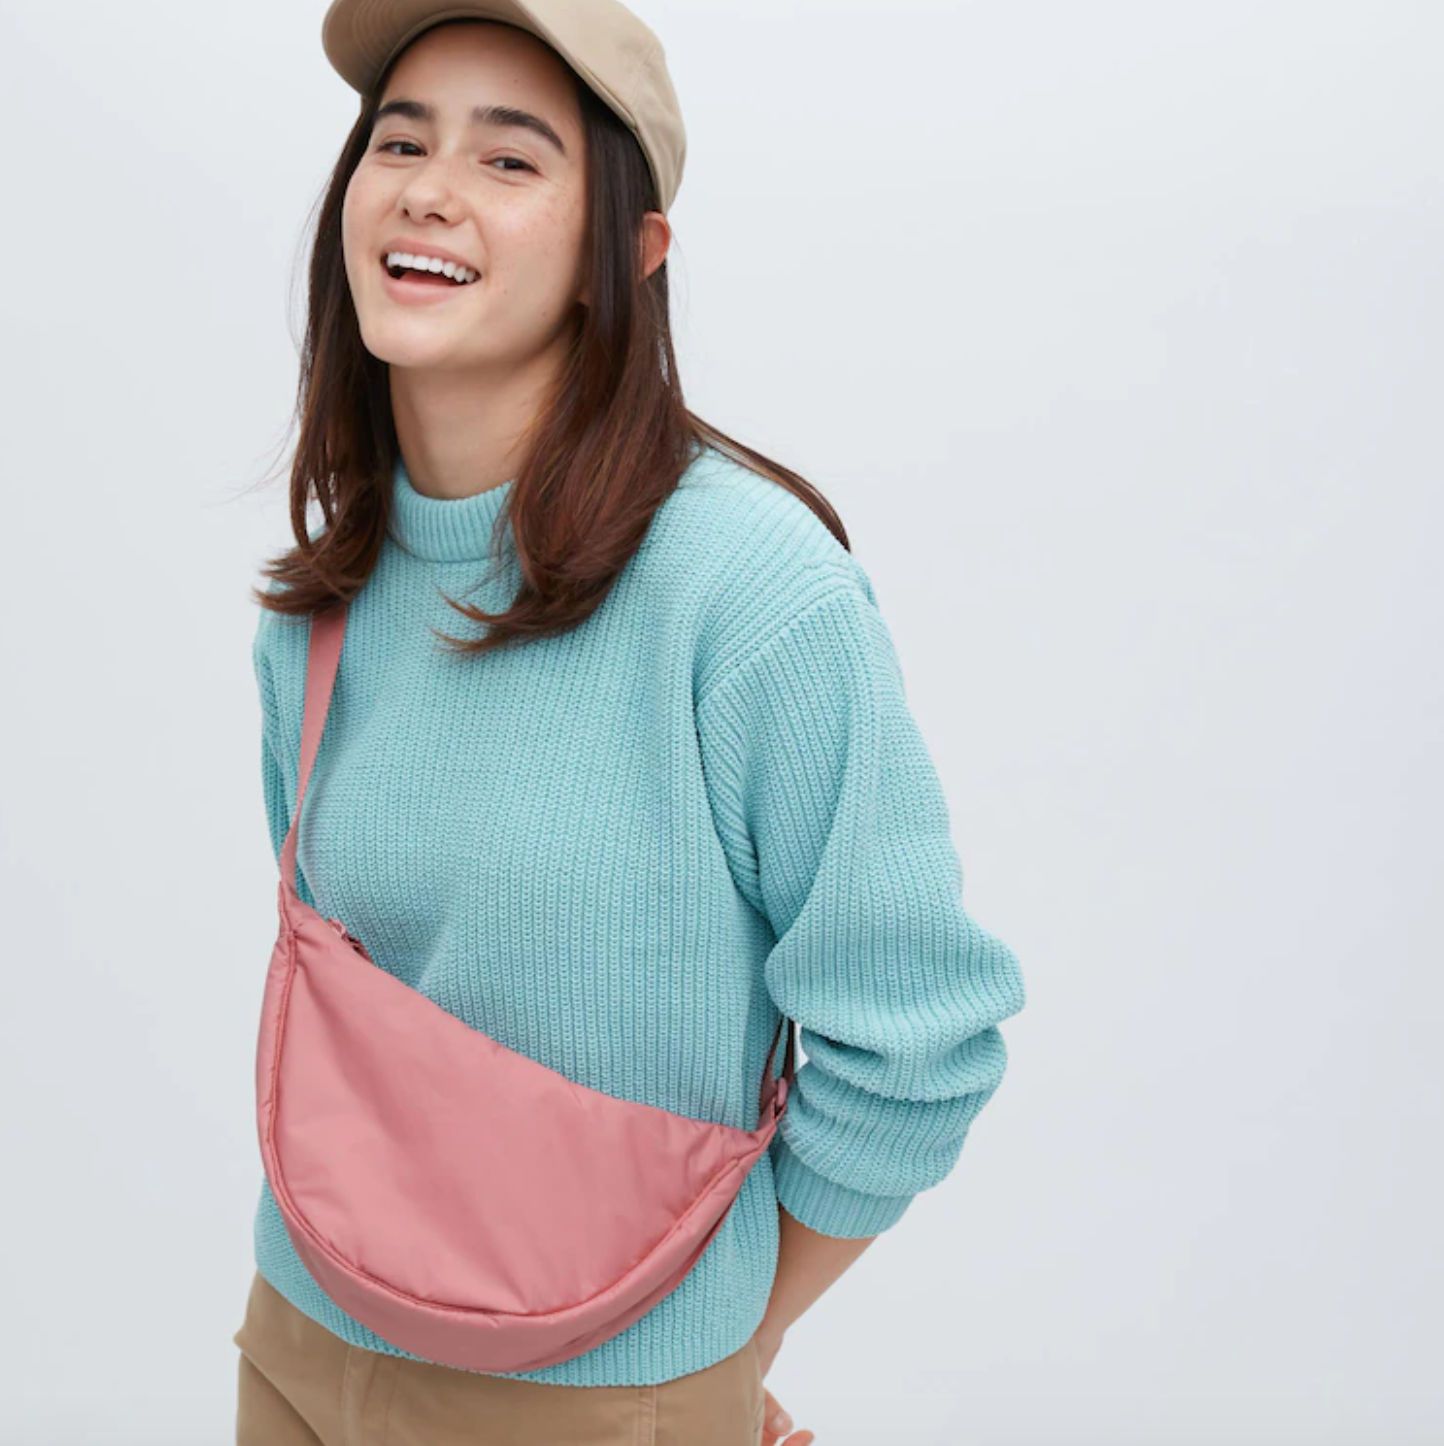 Why is TikTok going crazy over this viral Uniqlo bag?